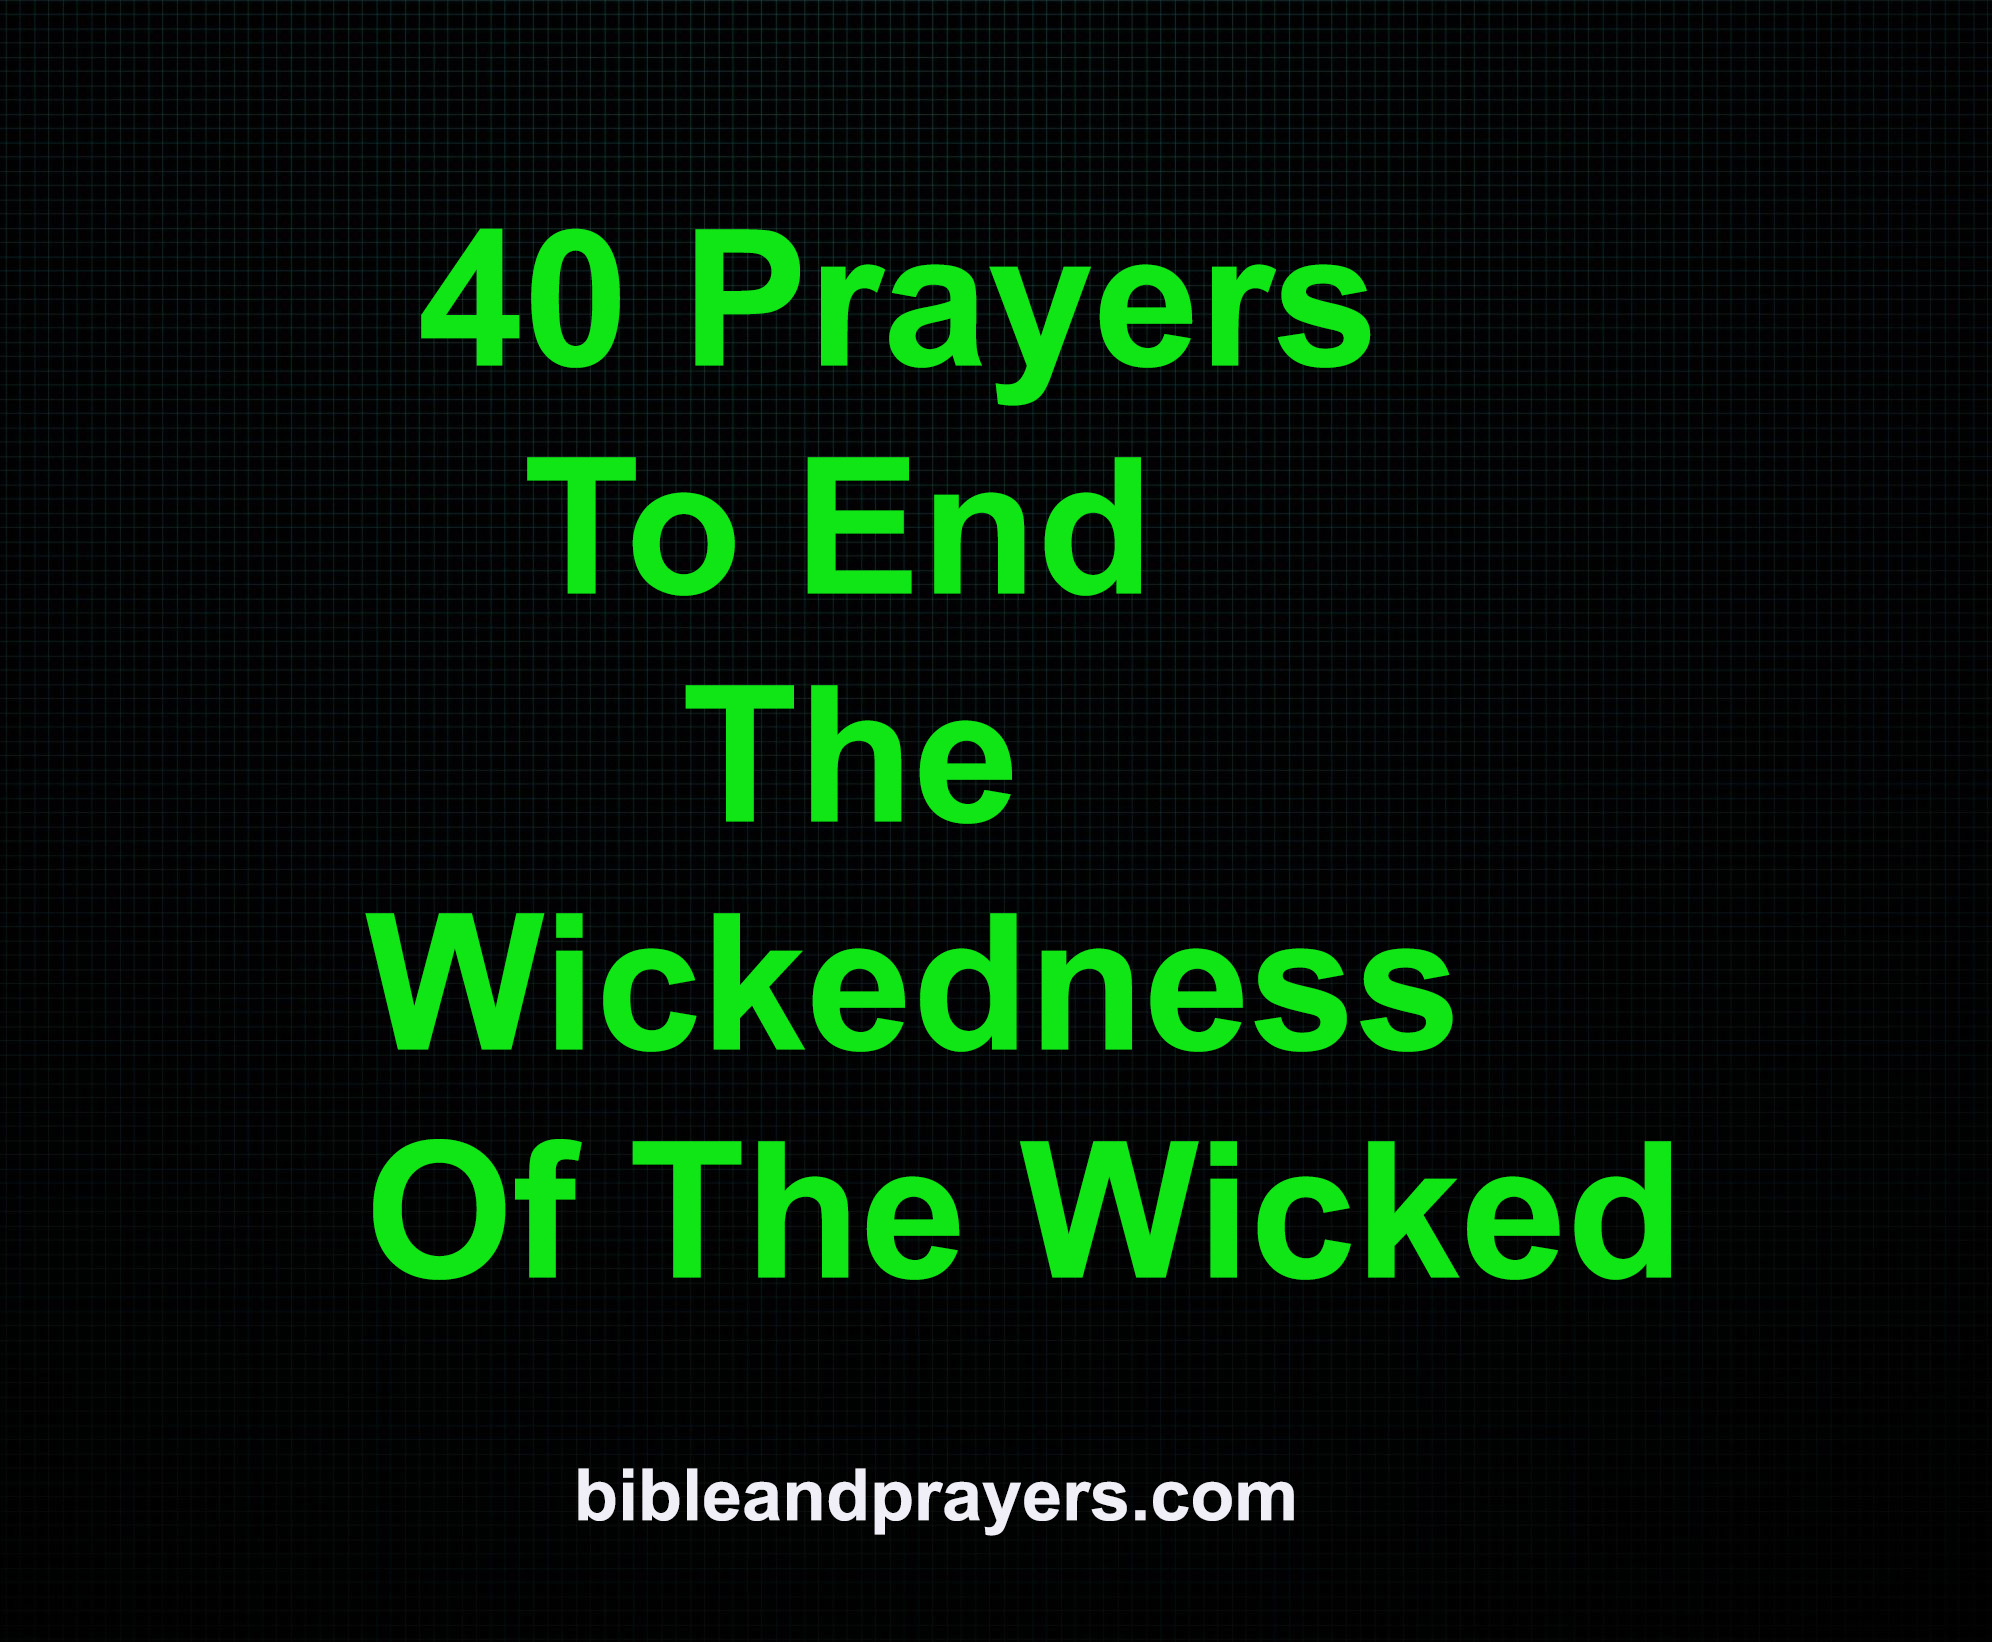 40 Prayers To End The Wickedness Of The Wicked